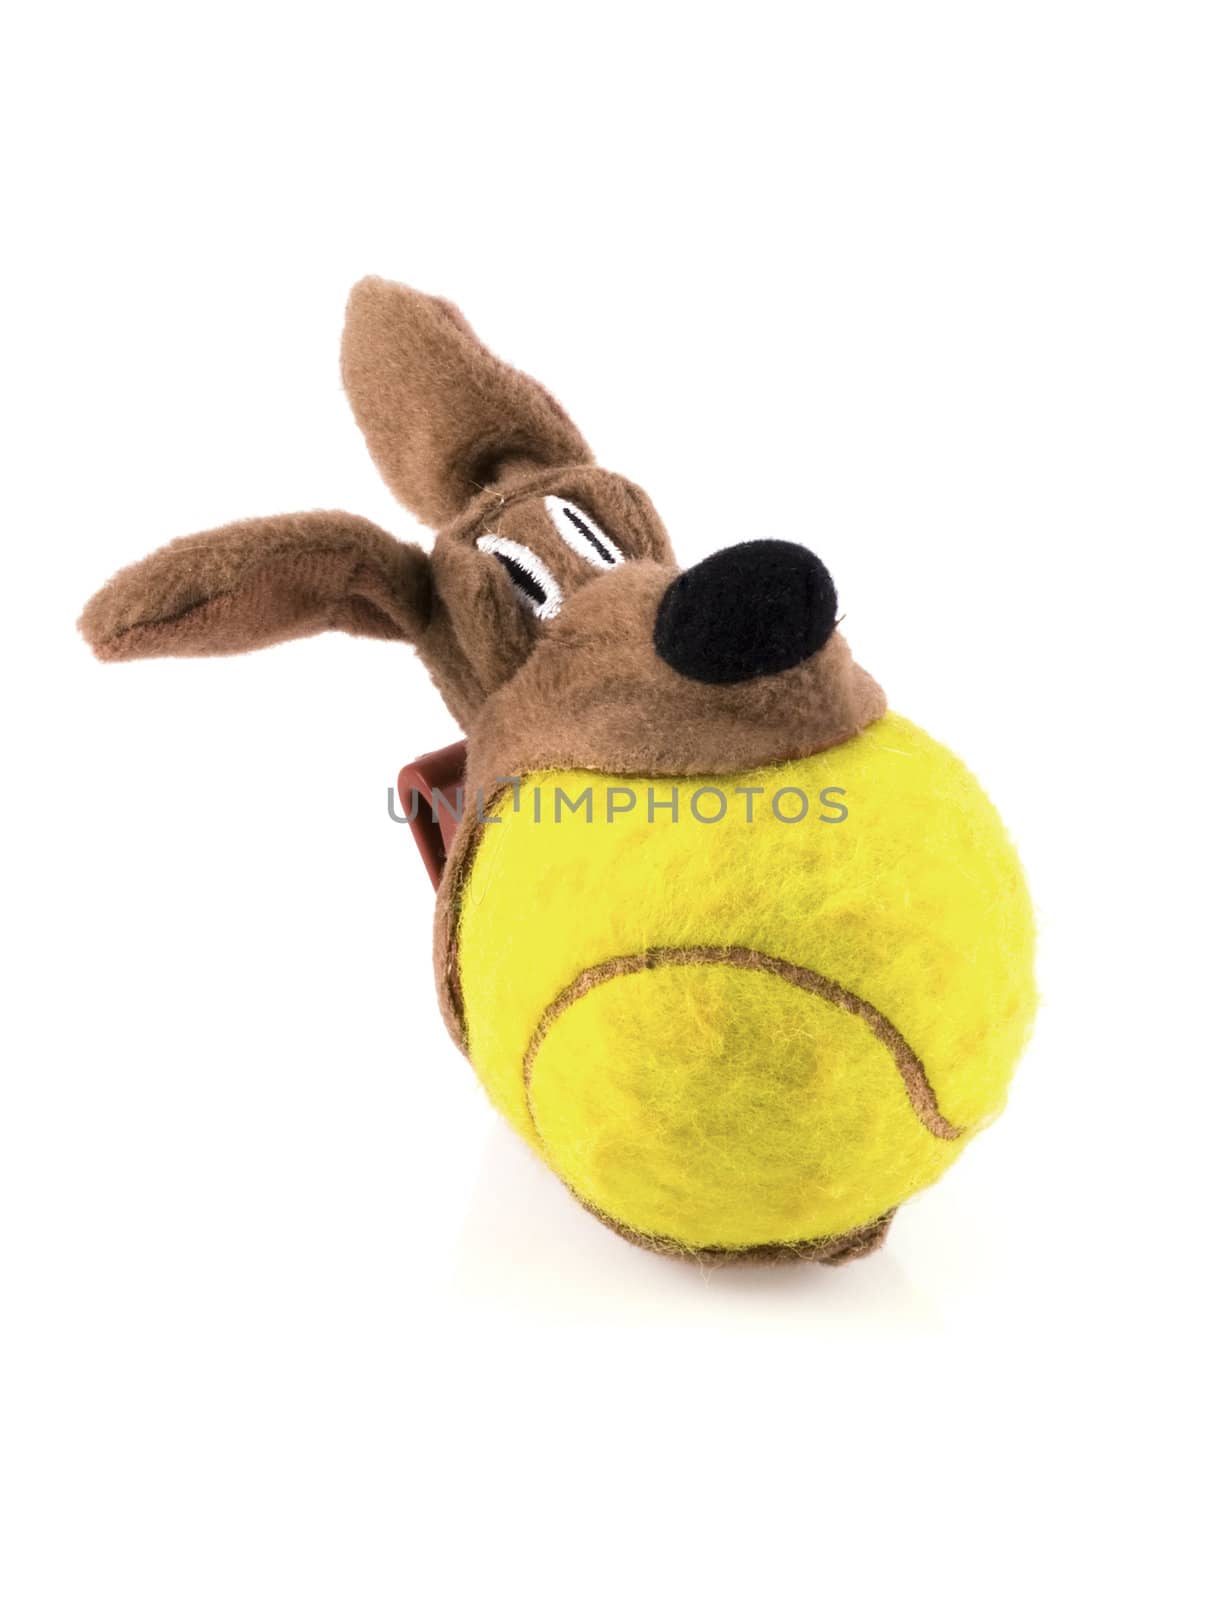 Ball holder plaything in doggy shape, isolated on white.